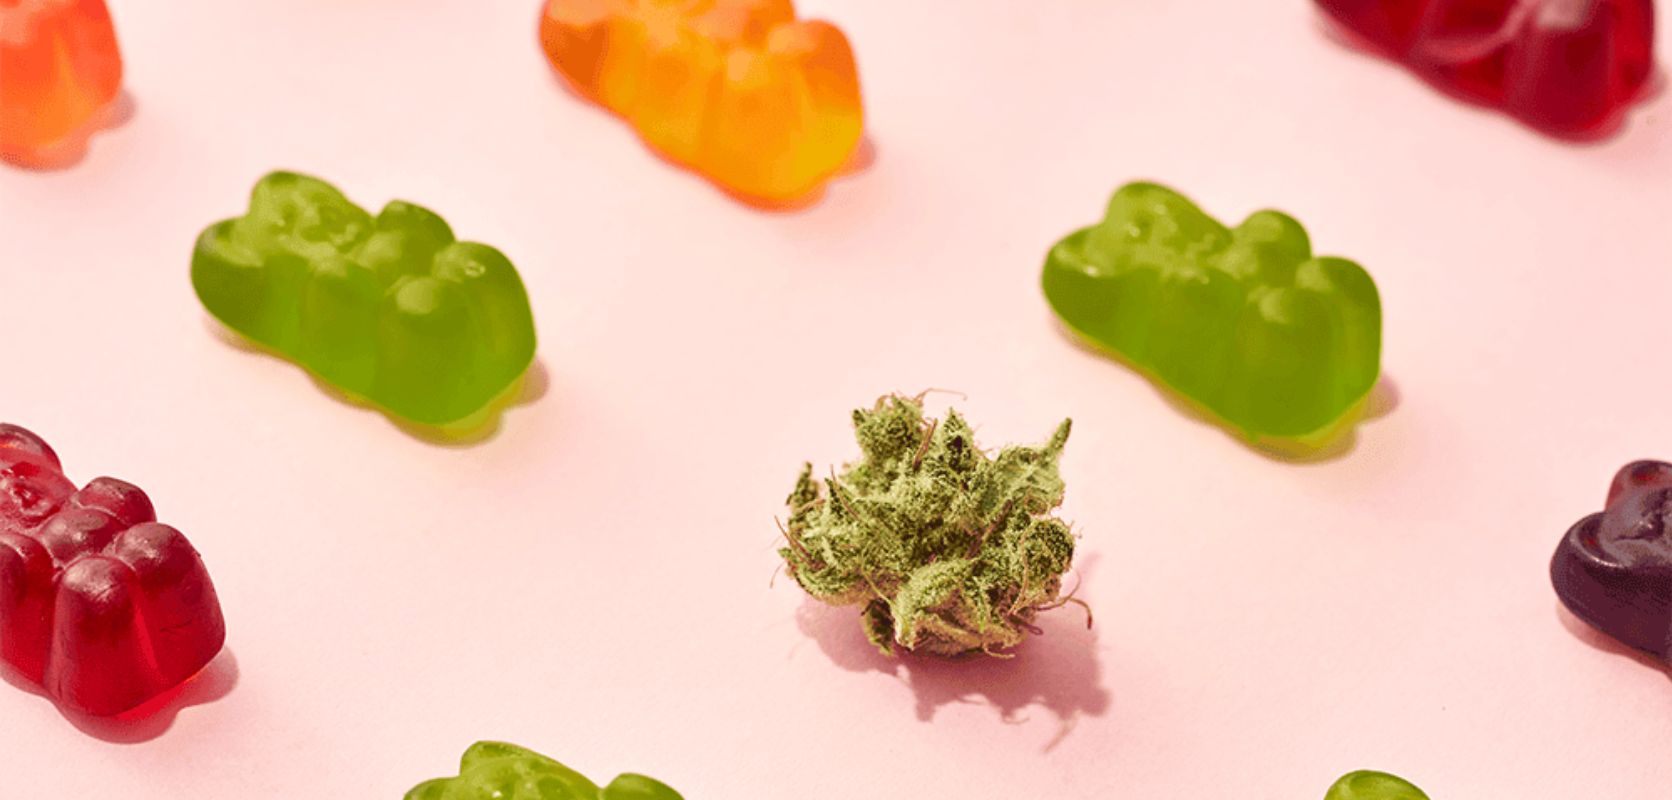 Those mouth-watering goodies that look like real candies from our childhood are actually weed gummies! They come in a wide array of flavours, colours, and shapes - think pastries, THC gummy bears, and chips! 